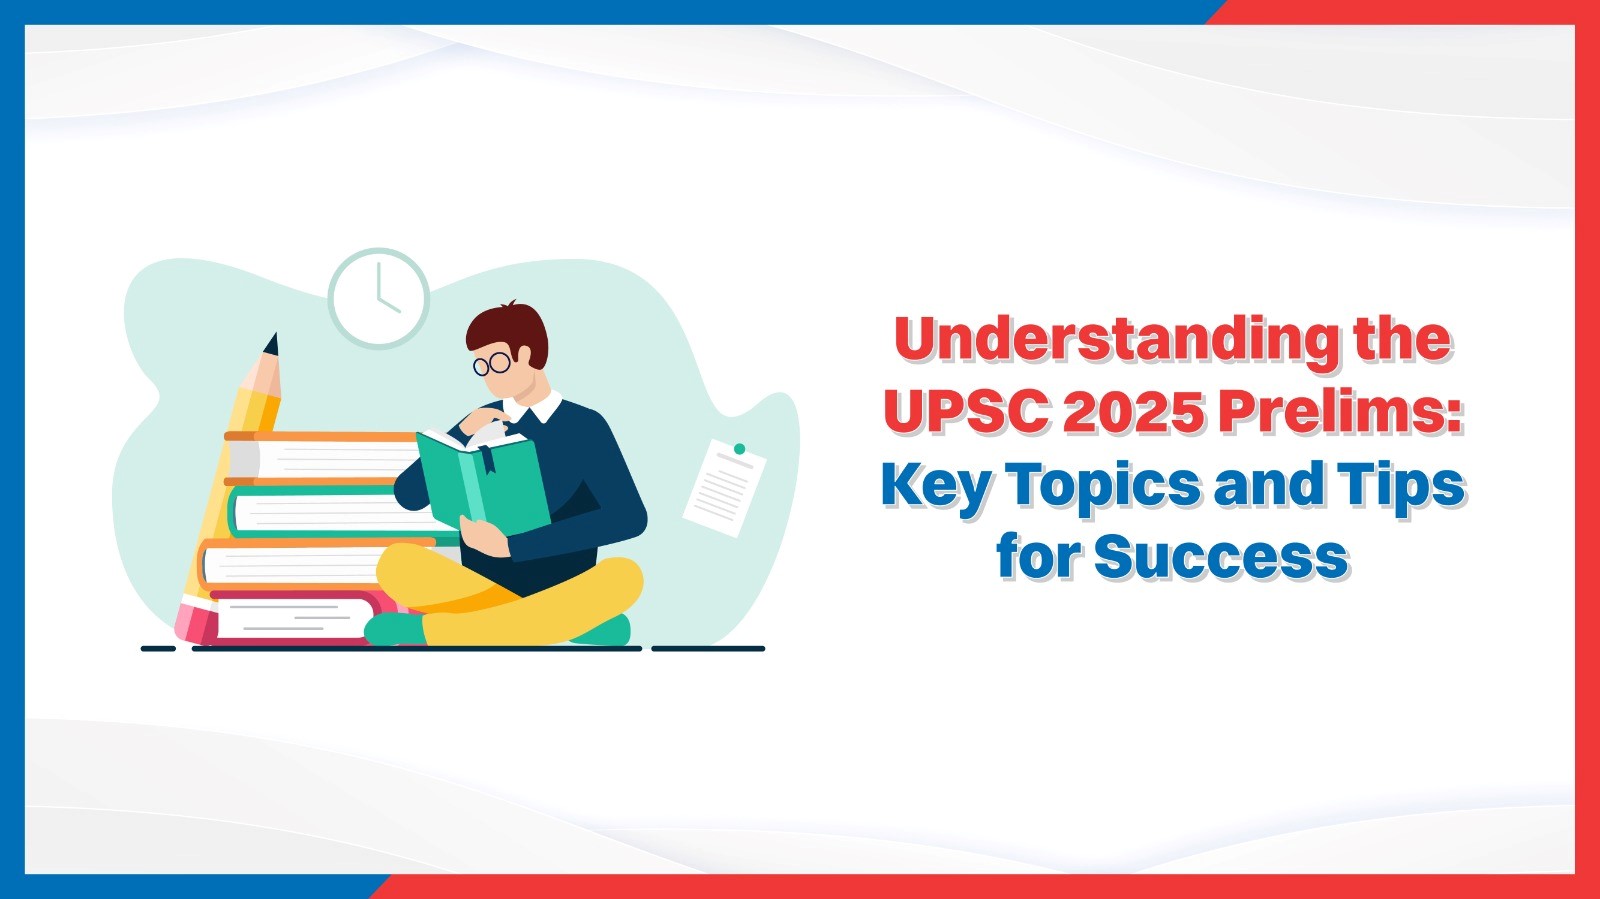 Understanding the UPSC 2025 Prelims Key Topics and Tips for Success.jpg